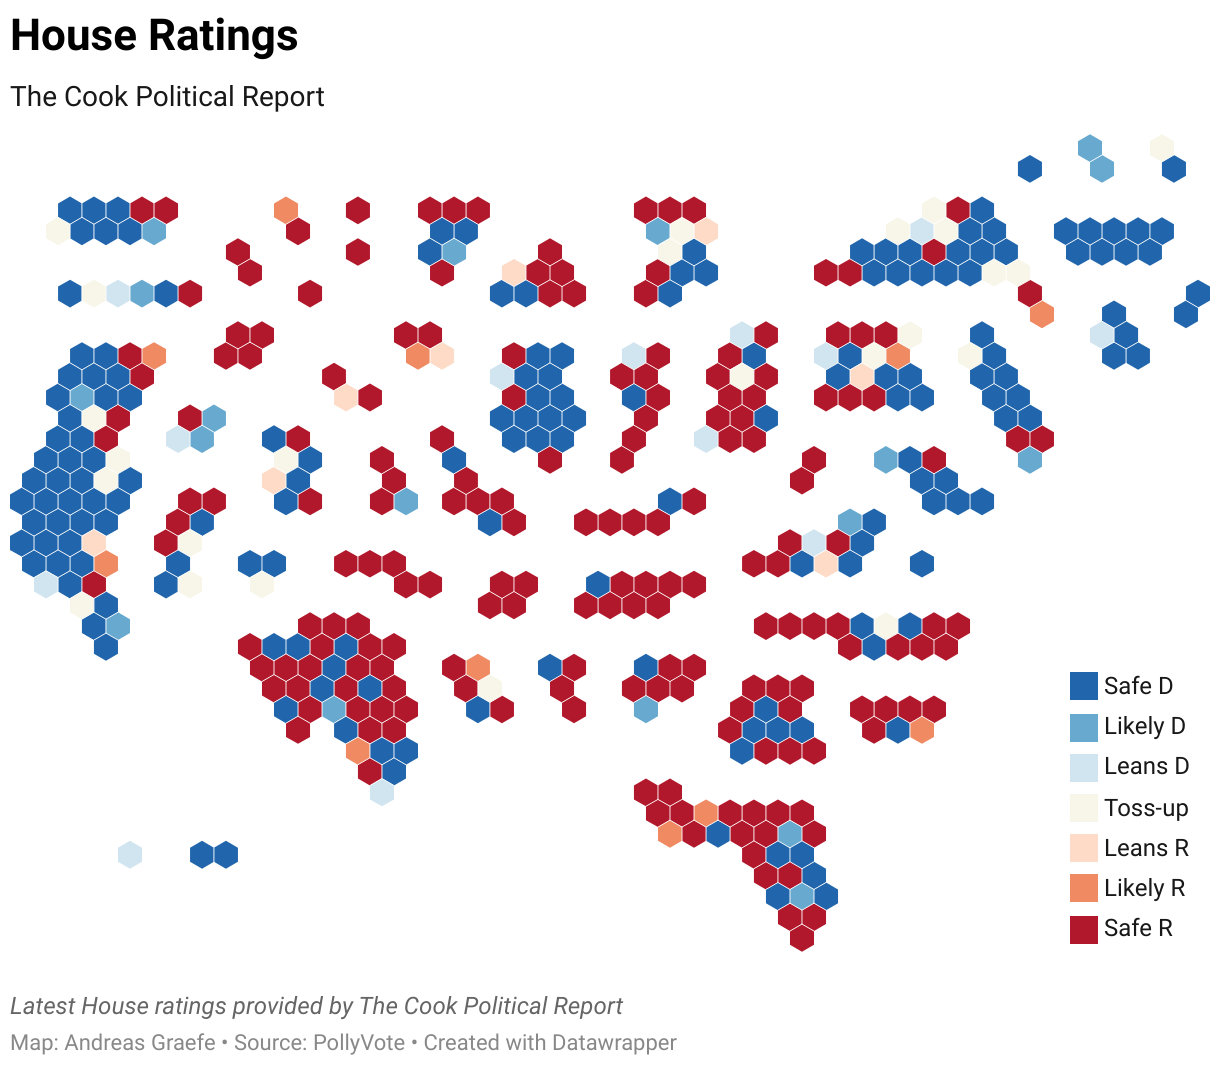 The Cook Political Report House ratings for the 2024 U.S. House of Representatives Election